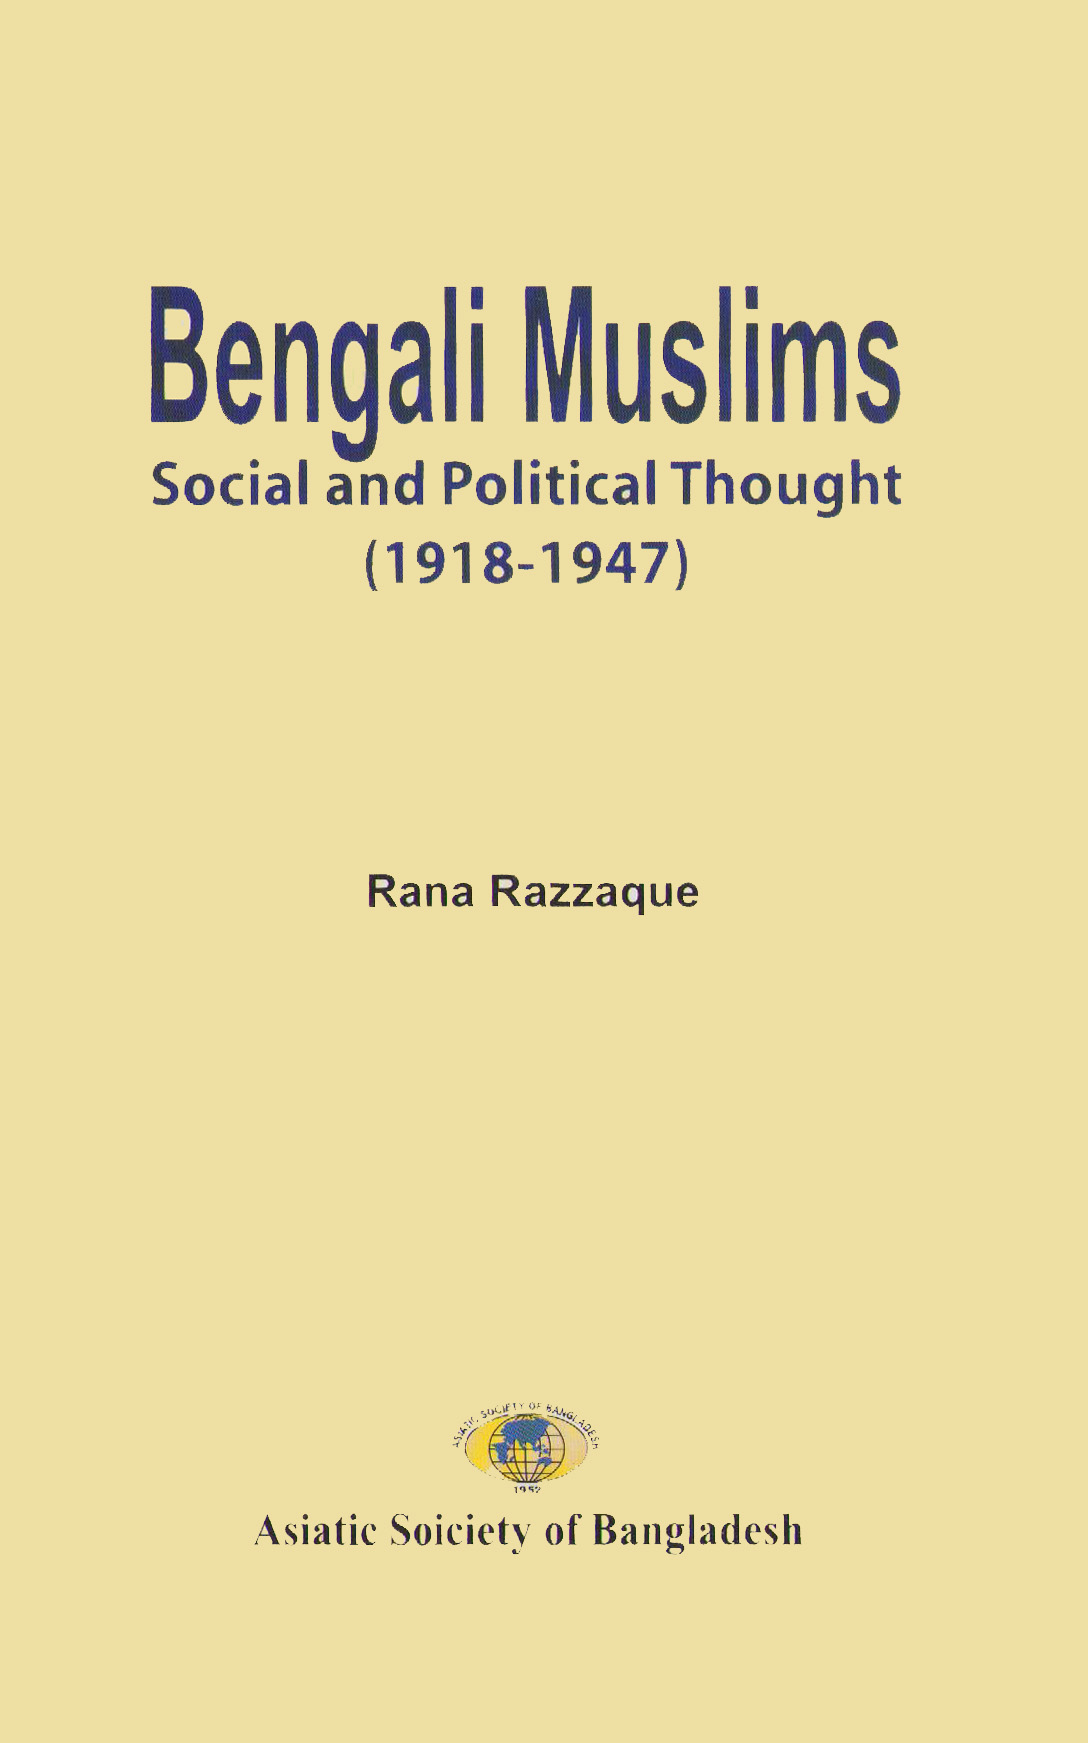 ASBP_140_Bengali Muslims: Social and Political Thought (1918-1947) by Dr. Rana Razzaque (2019)